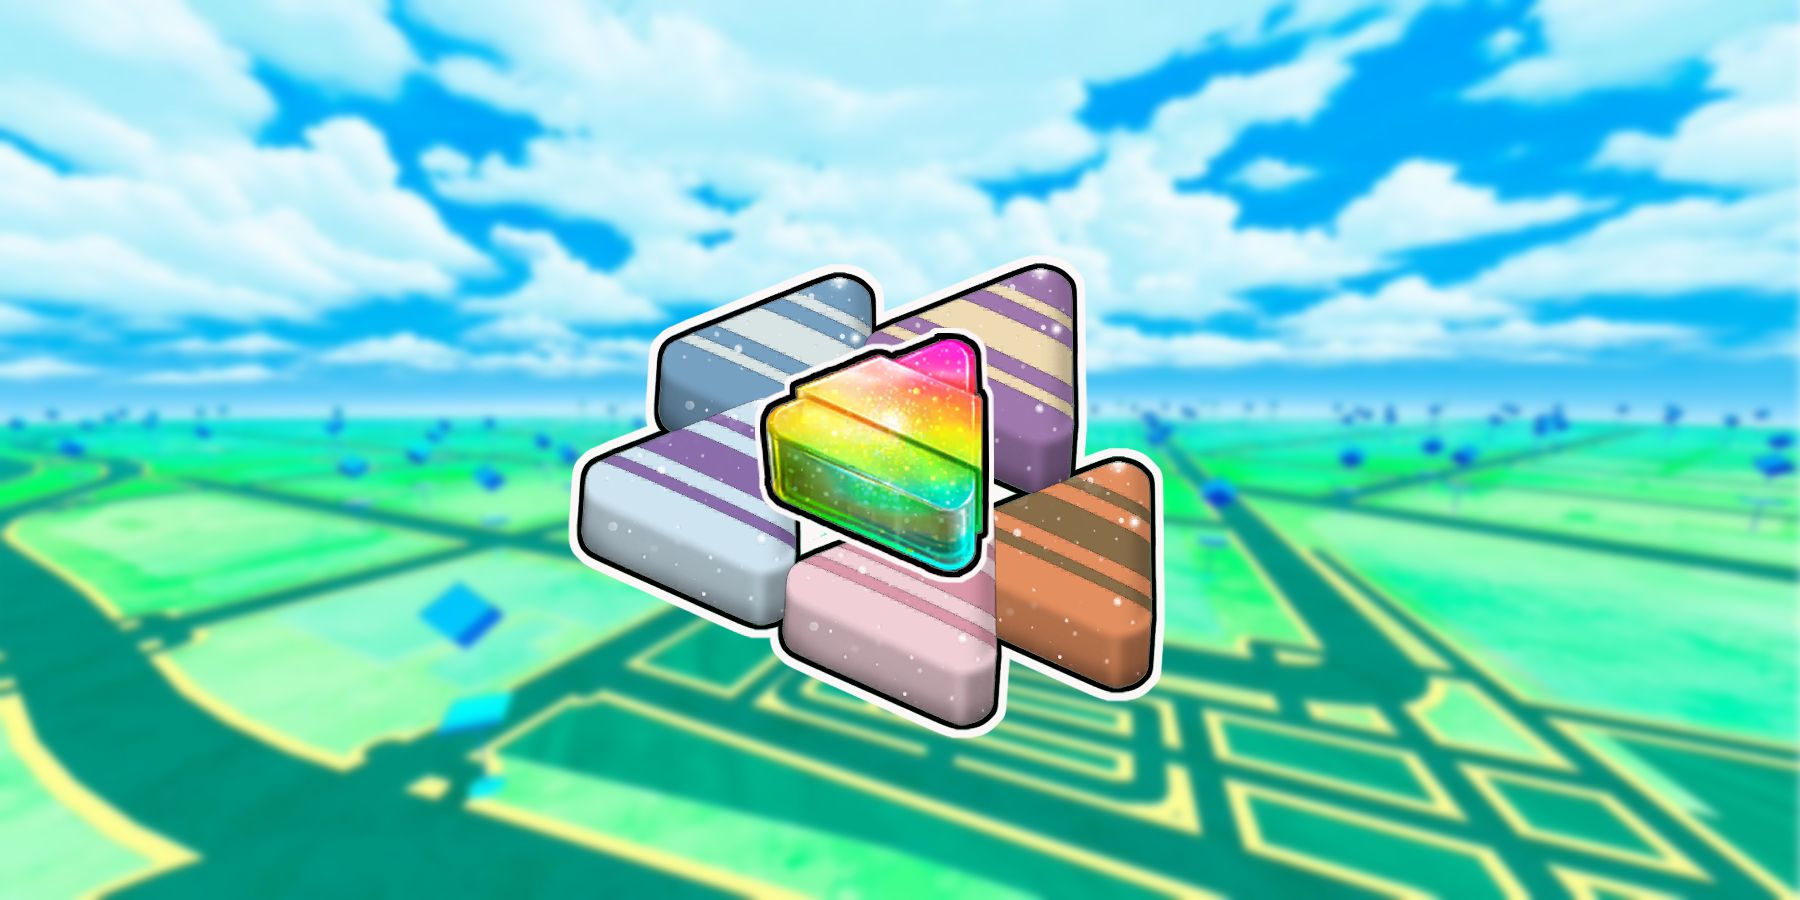 pokemon go xl image of candy with map background